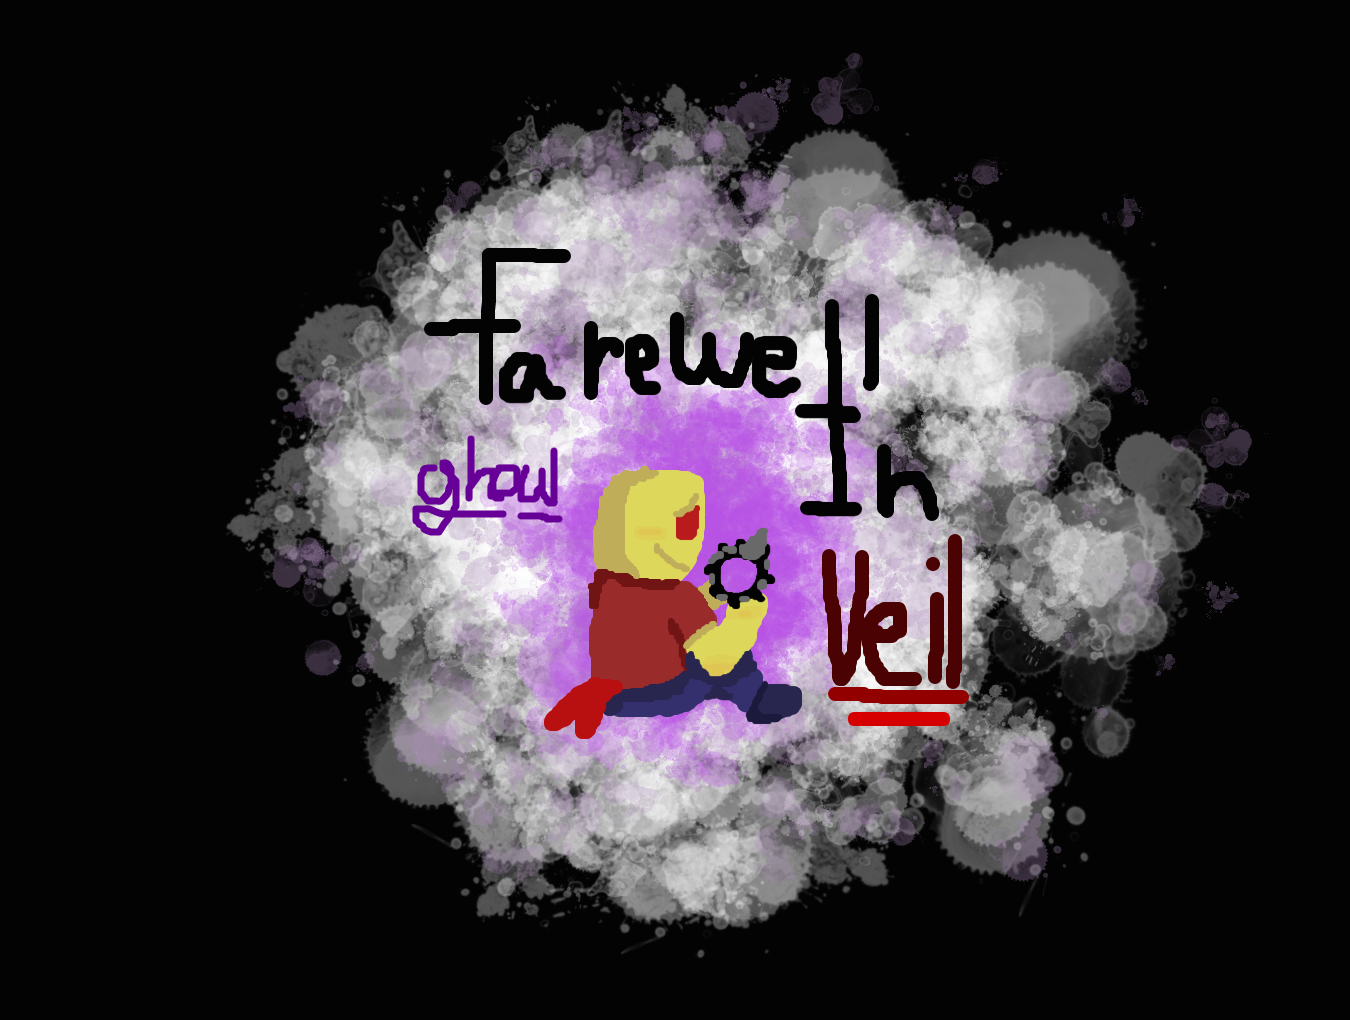 Farewell In Veil Super Paper Roblox By Etherealghoul On Deviantart - super paper roblox roblox